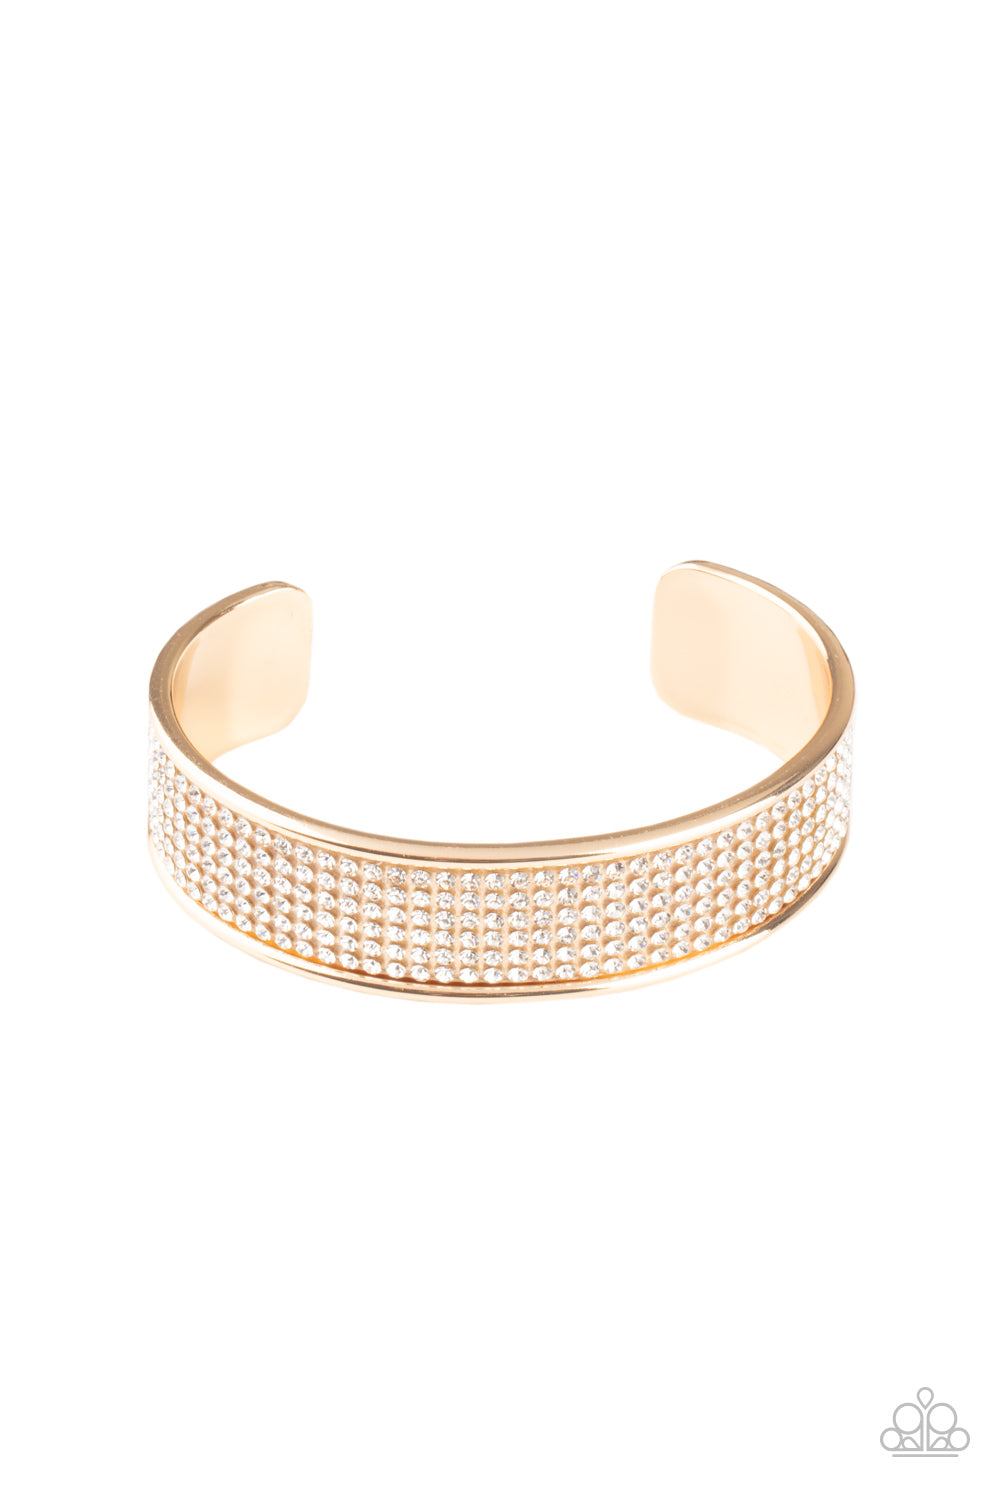 Cant Believe Your ICE Gold Bracelet - Paparazzi Accessories